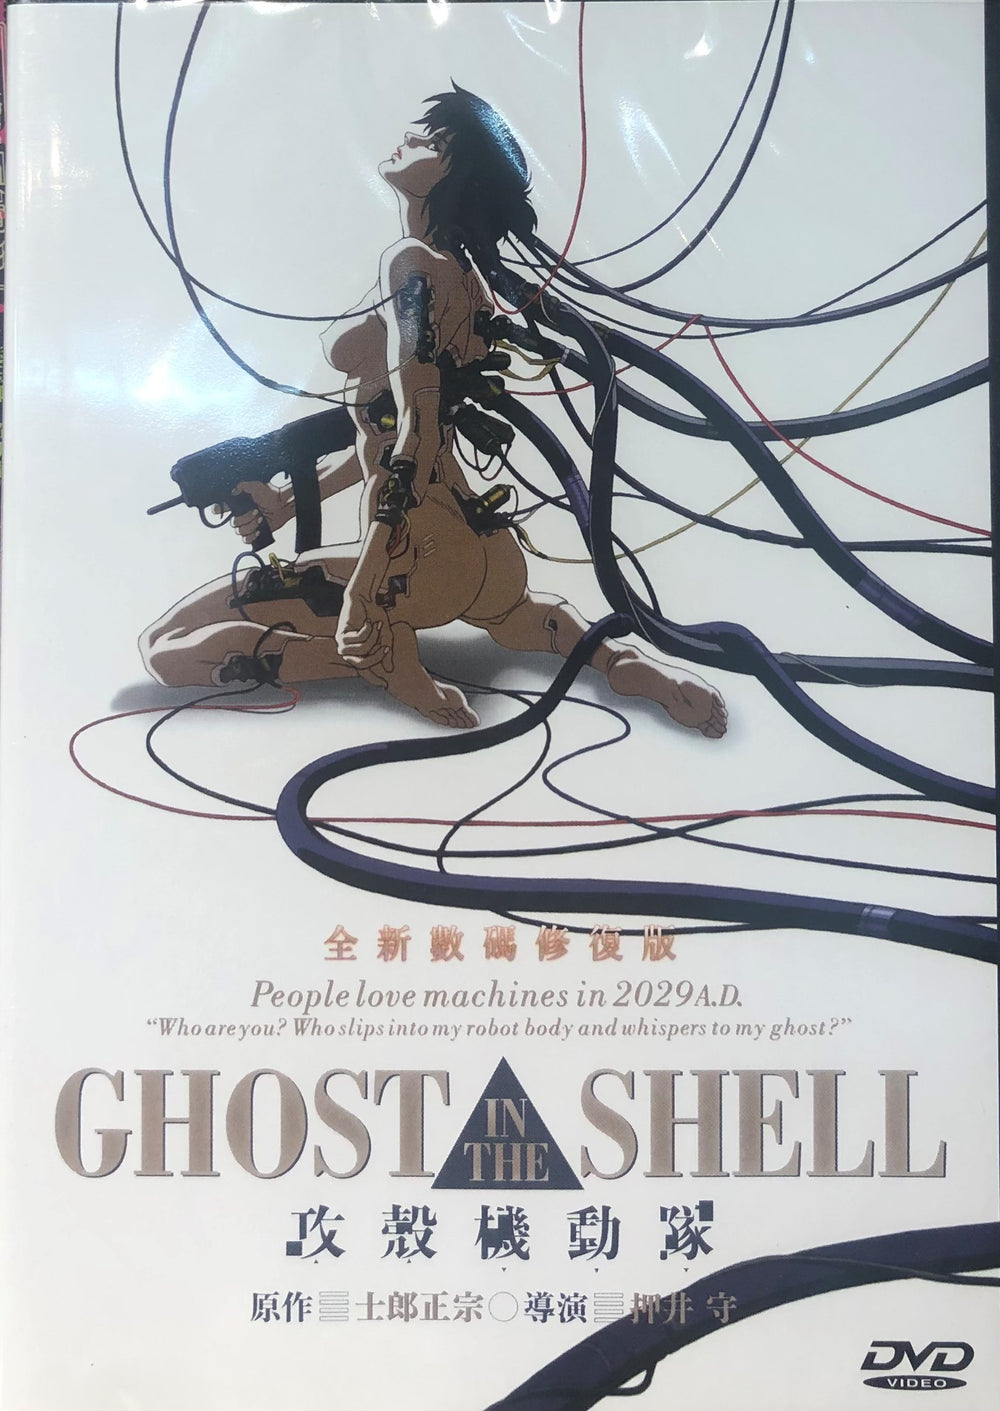 GHOST IN THE SHELL 攻殼機動隊 1995 DVD ENGLISH SUBTITLES (REGION 3)